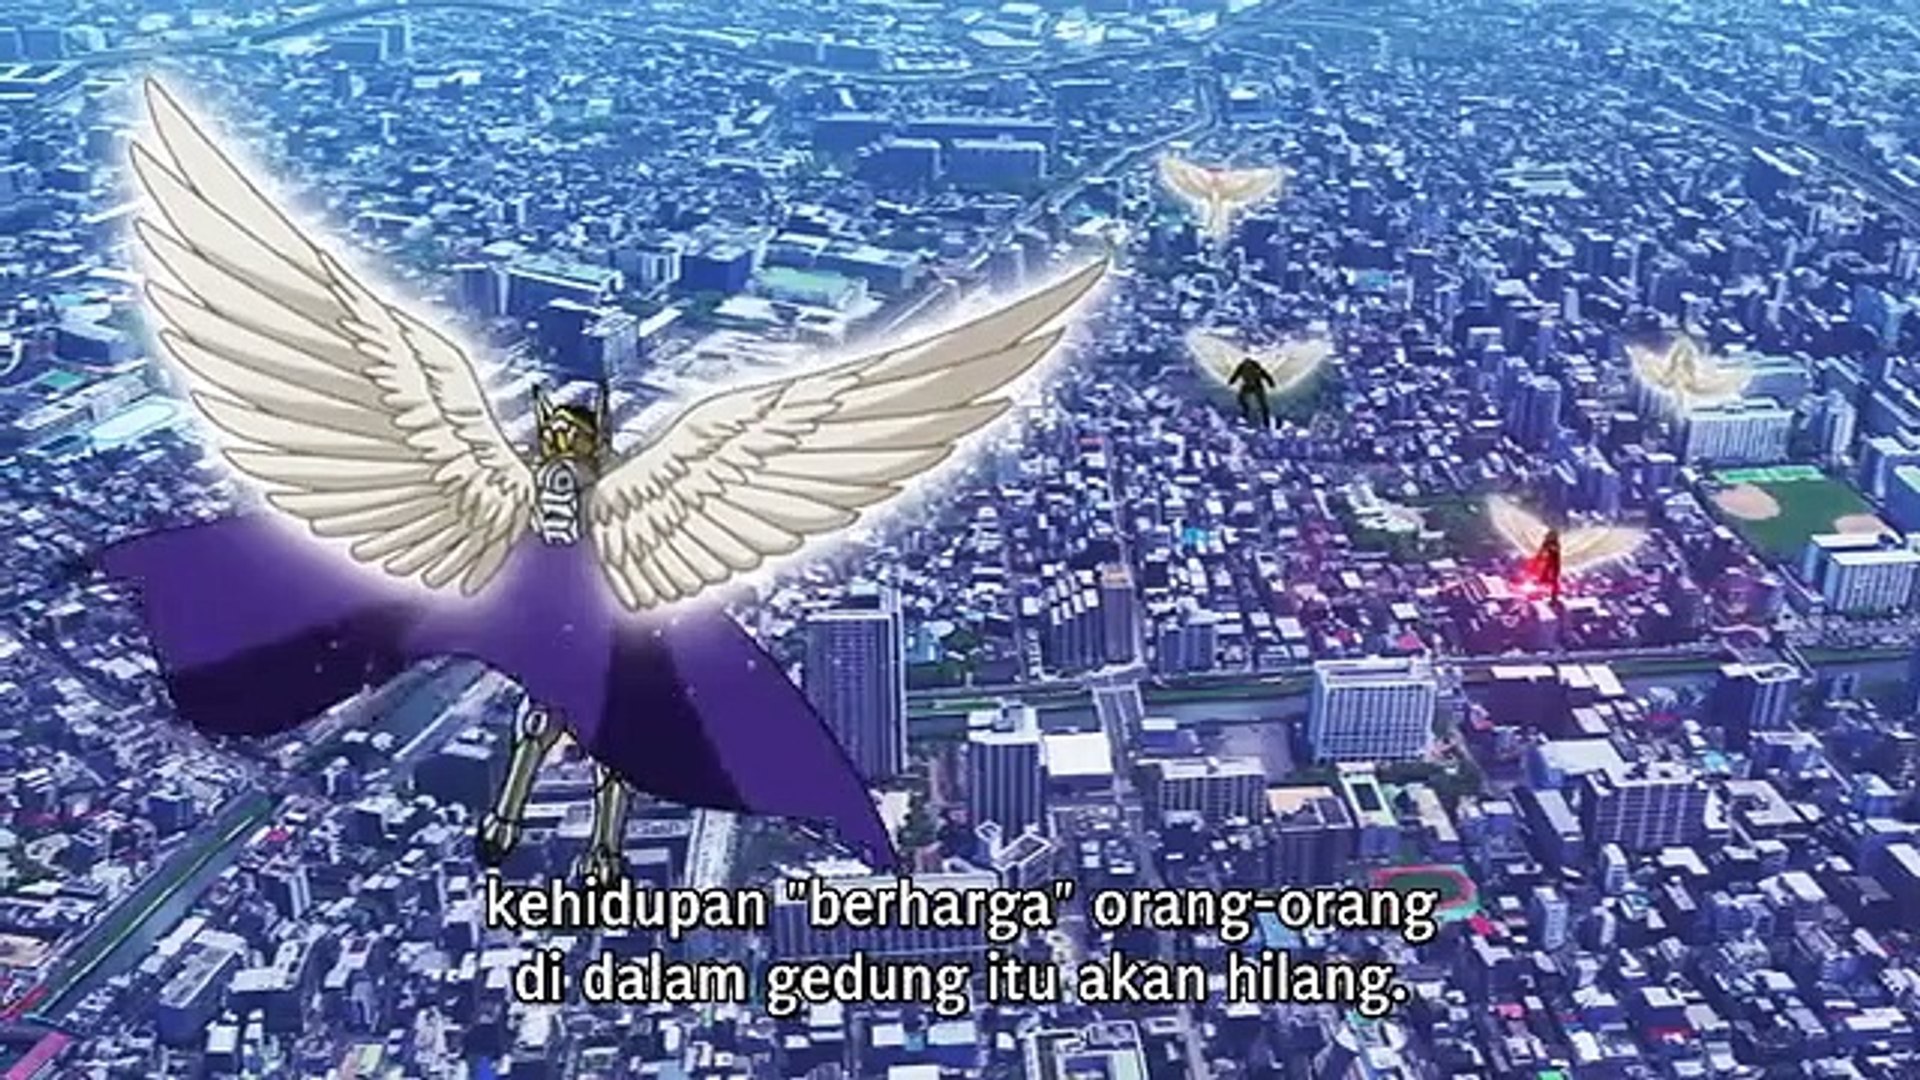 Platinum End Episode 3 - video Dailymotion